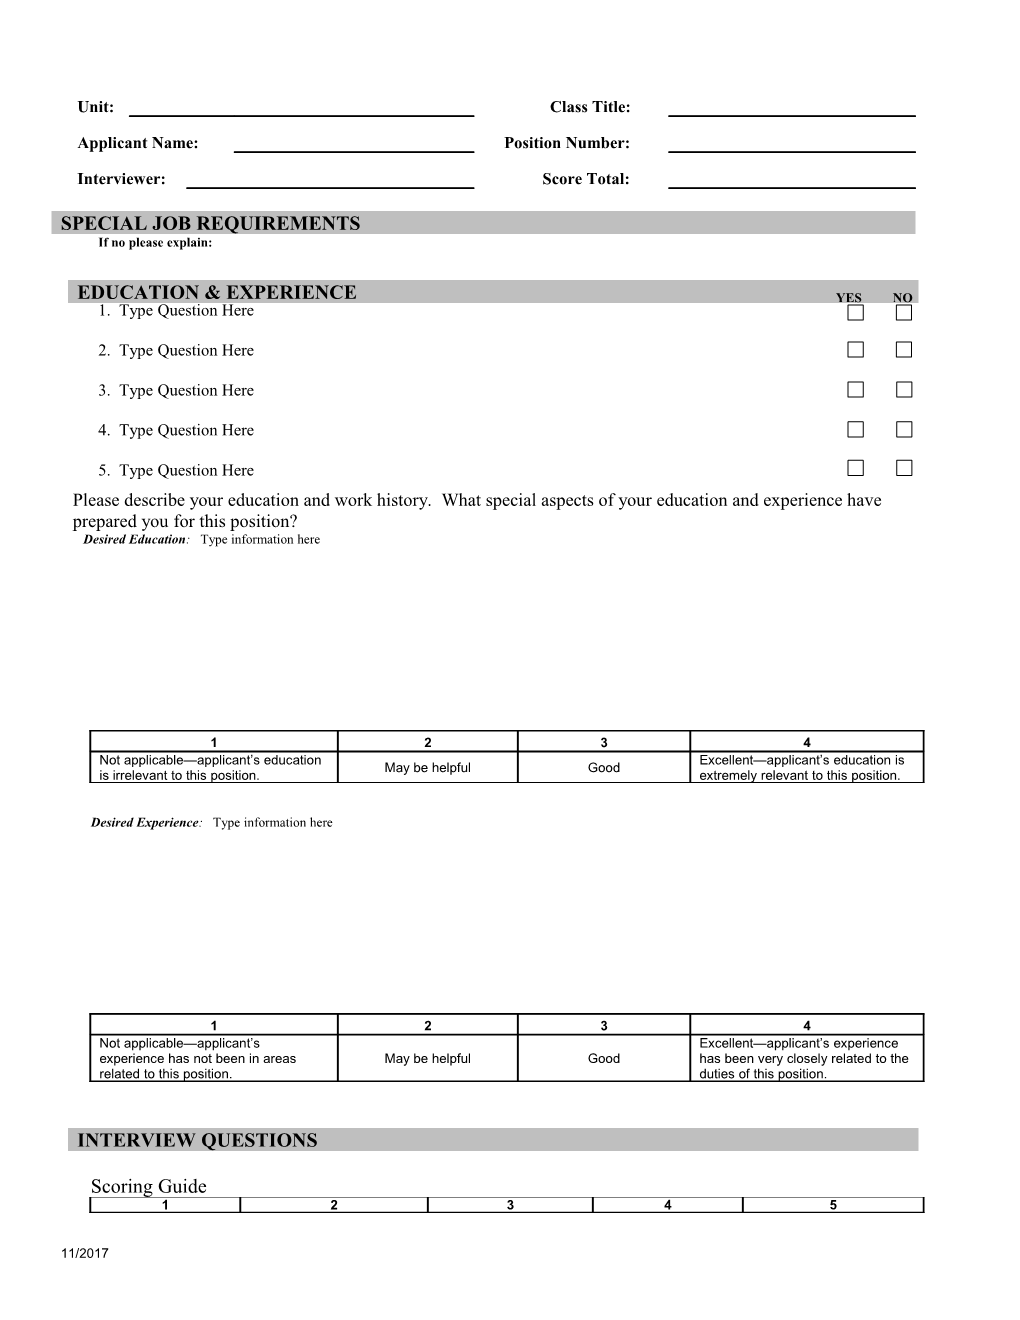 Interview Questions and Rating Sheet